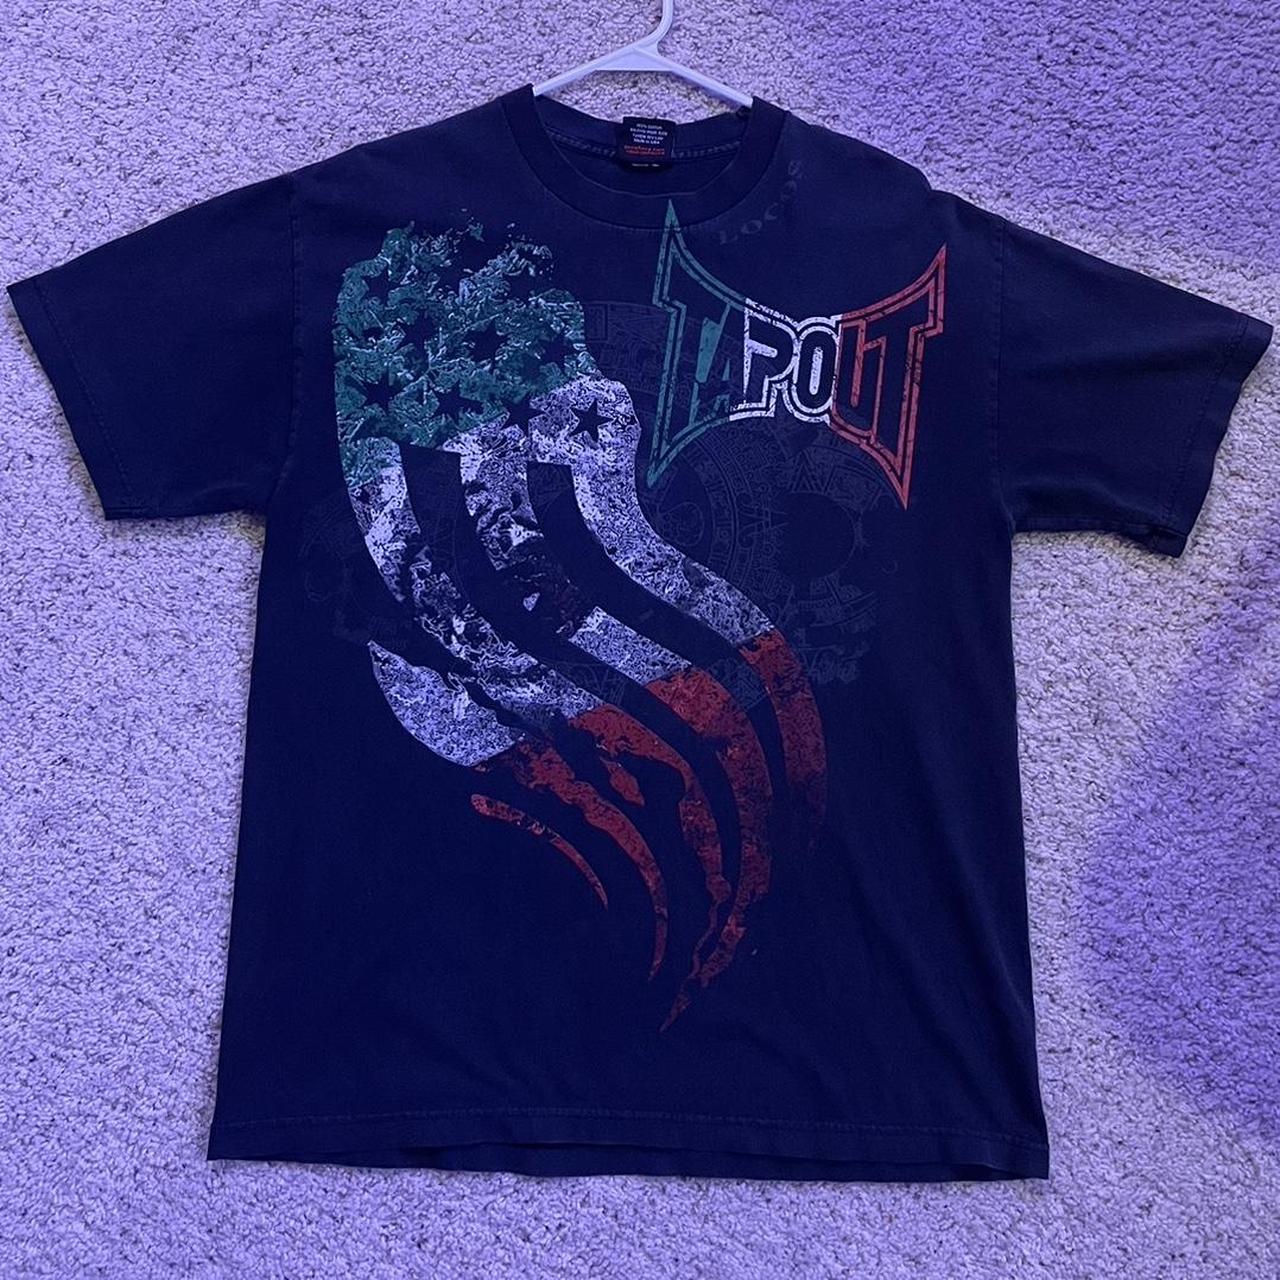 Vintage Tapout graphic tee no tag fits like large... - Depop